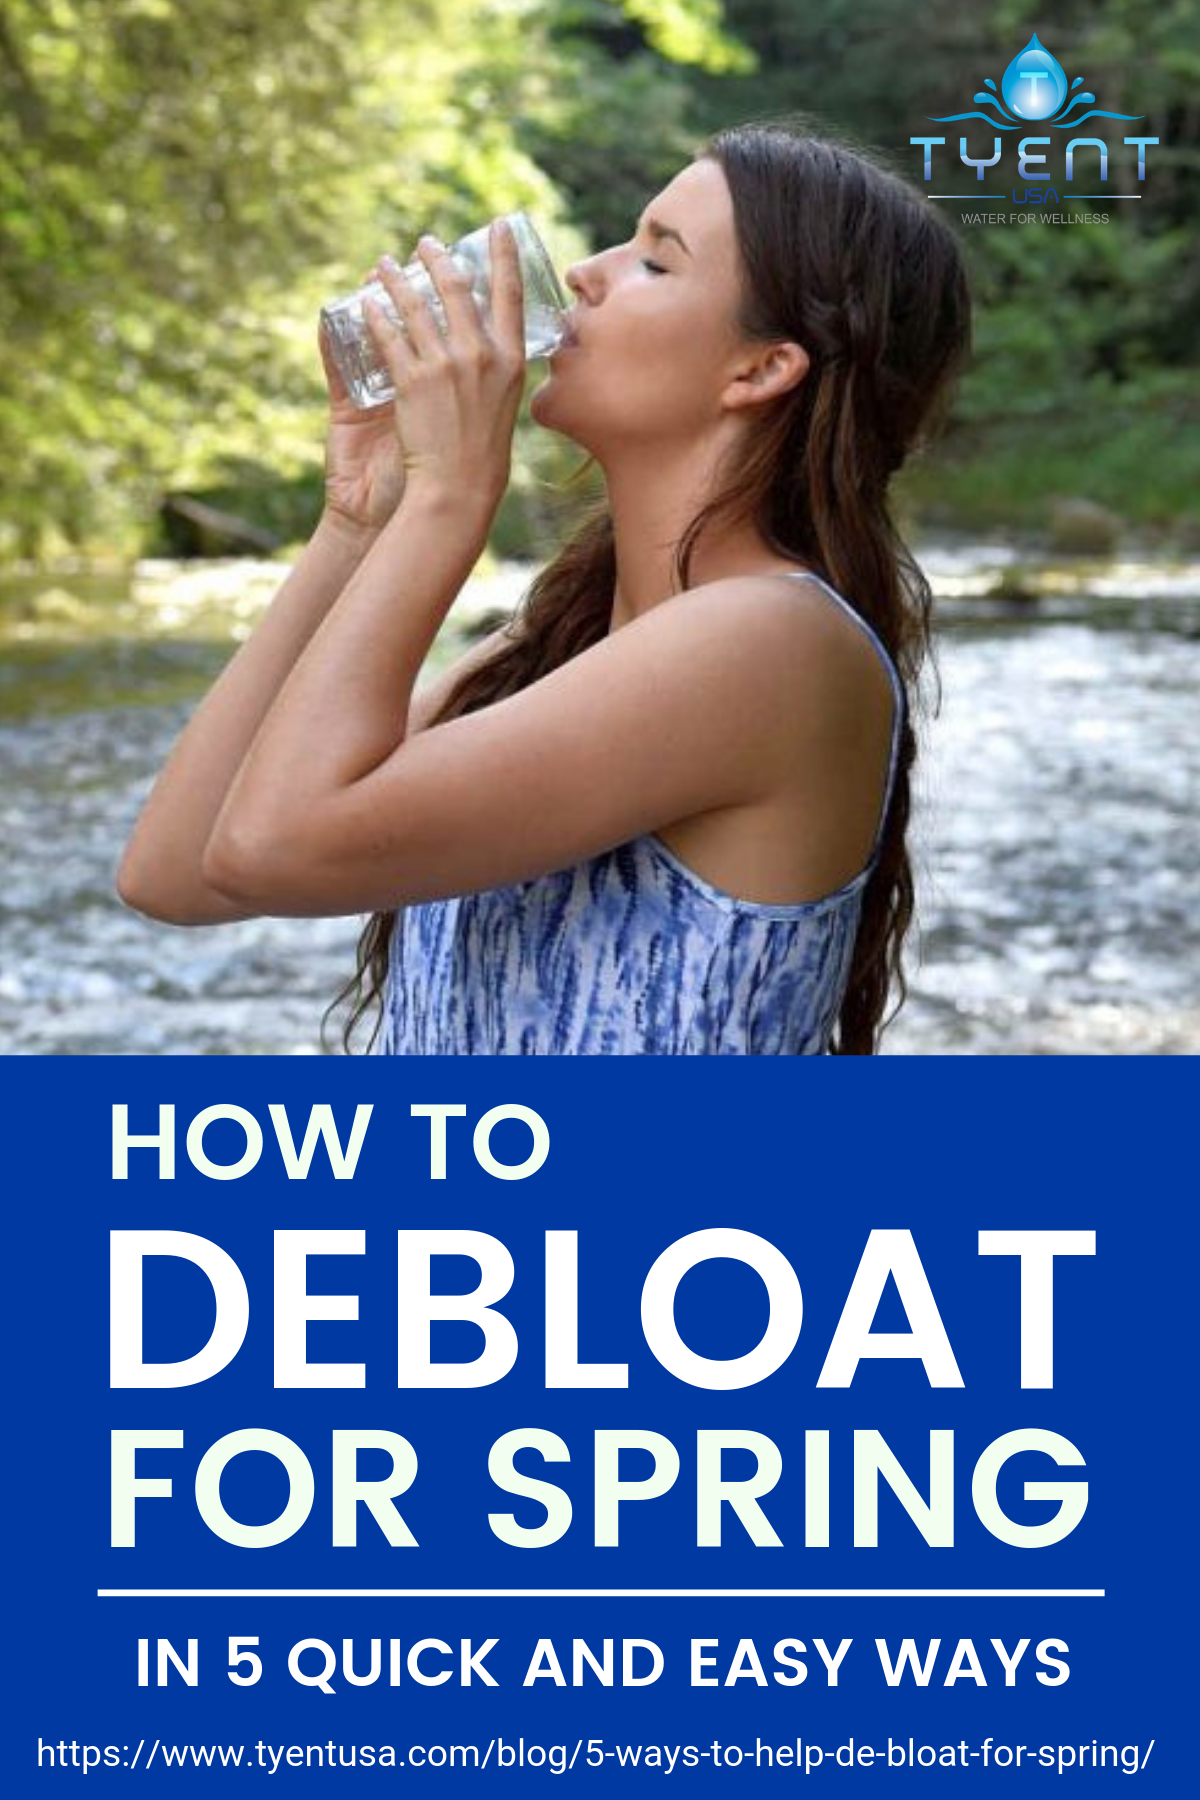 How To Debloat For Spring In 5 Quick And Easy Ways [INFOGRAPHIC] https://www.tyentusa.com/blog/5-ways-to-help-de-bloat-for-spring/